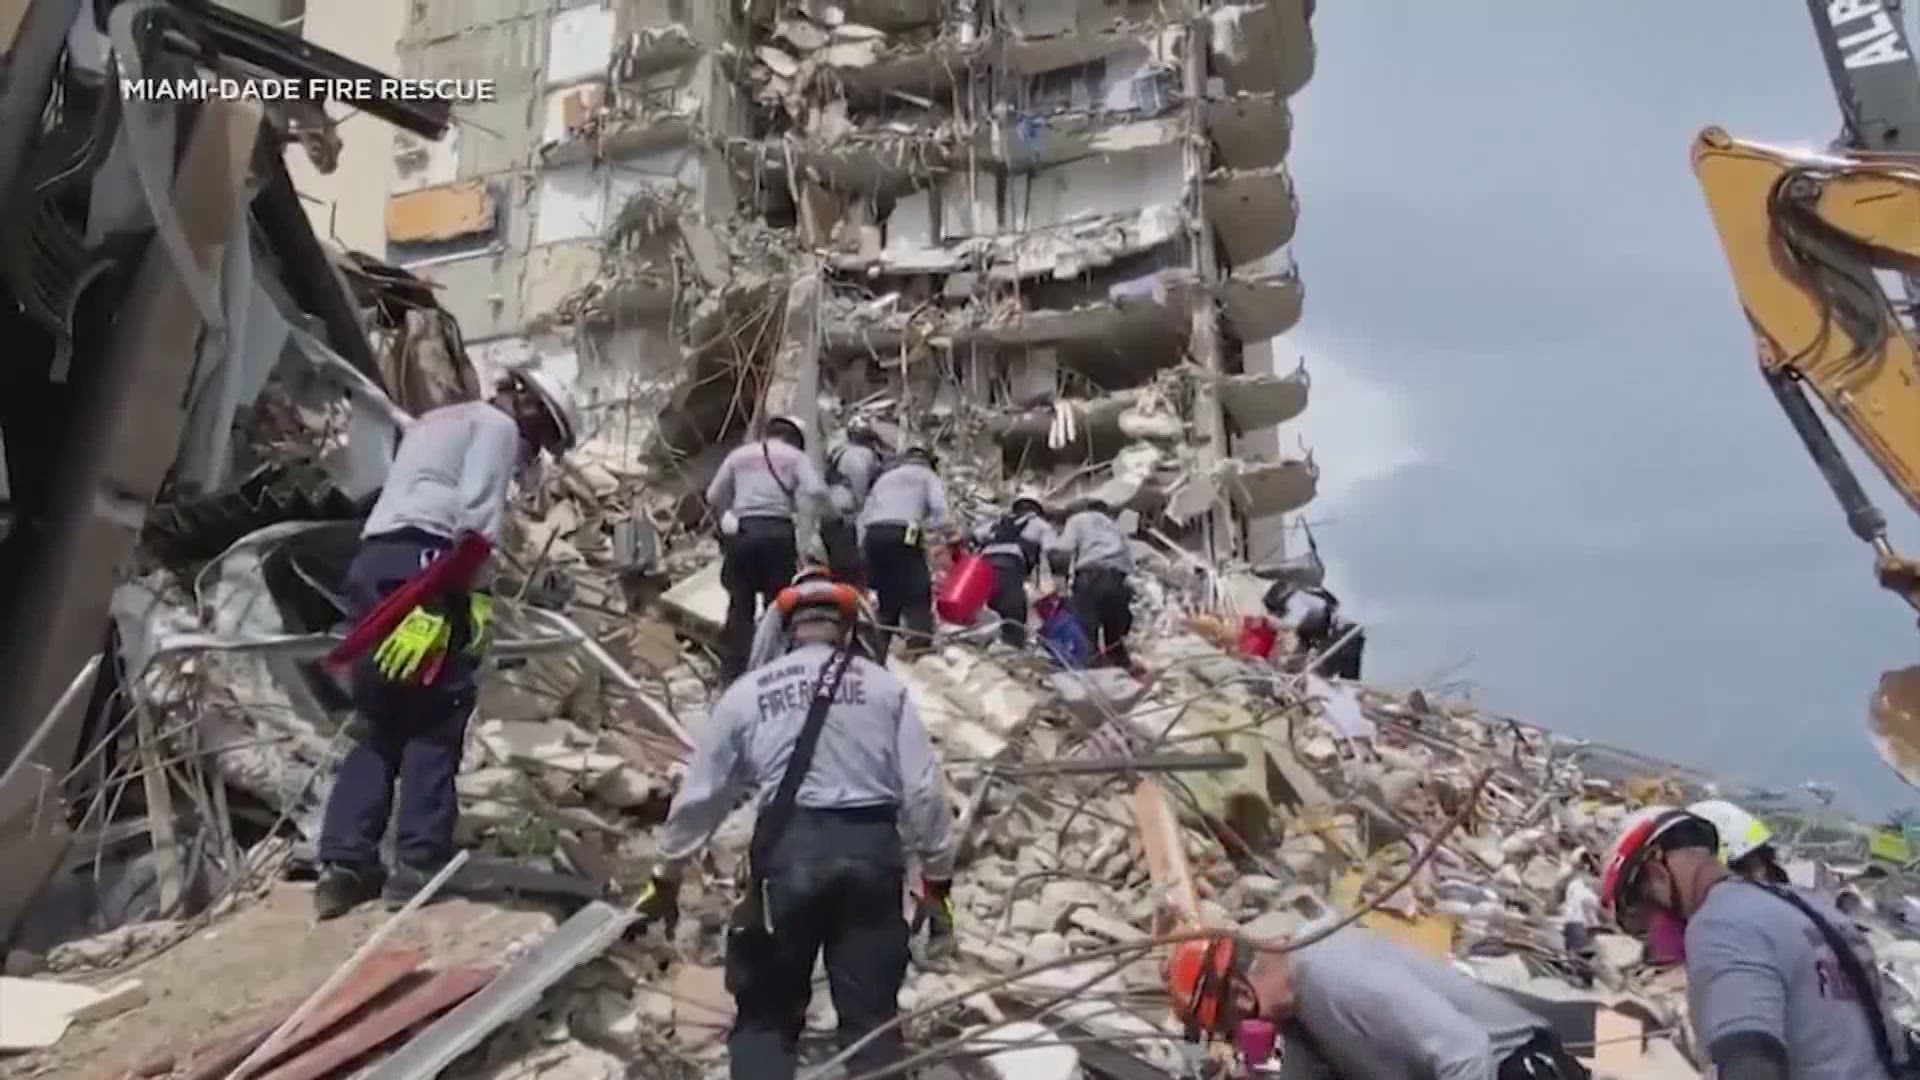 Professor Reginald DesRoches said it's quite uncommon to see a building collapse just from gravity loads.